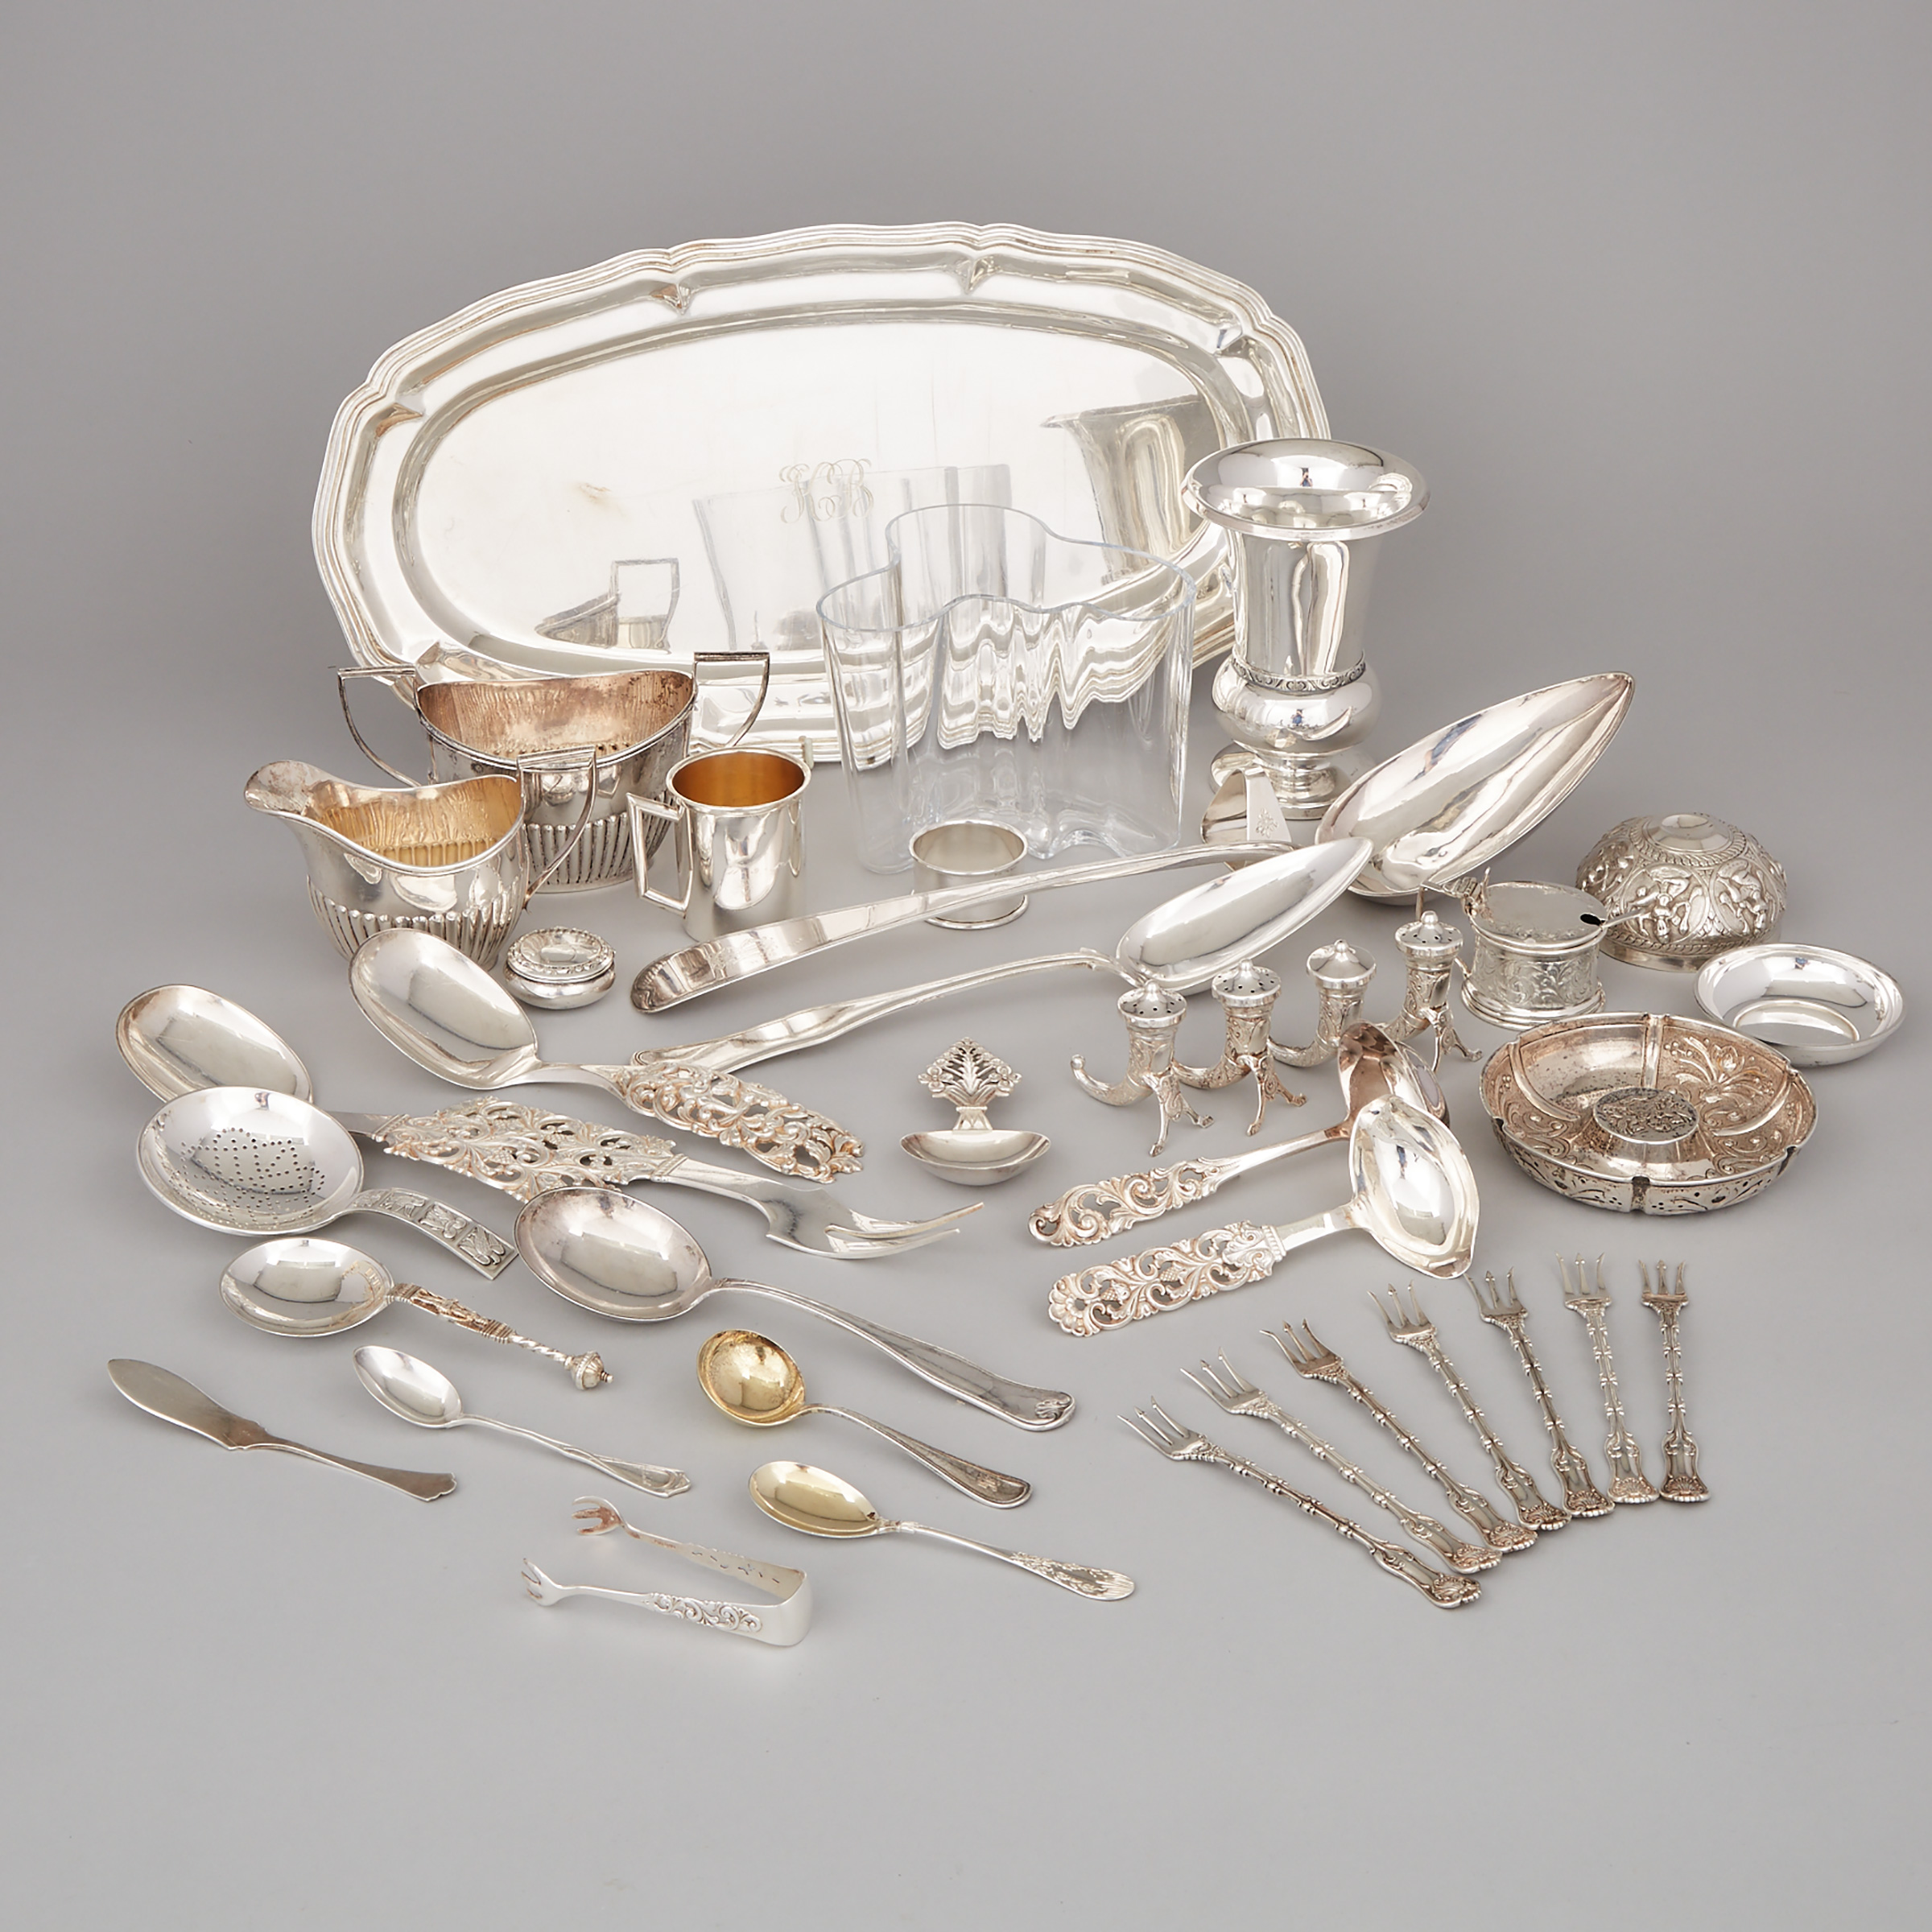 Group of Mainly North American, Scandinavian and English Silver, 20th century